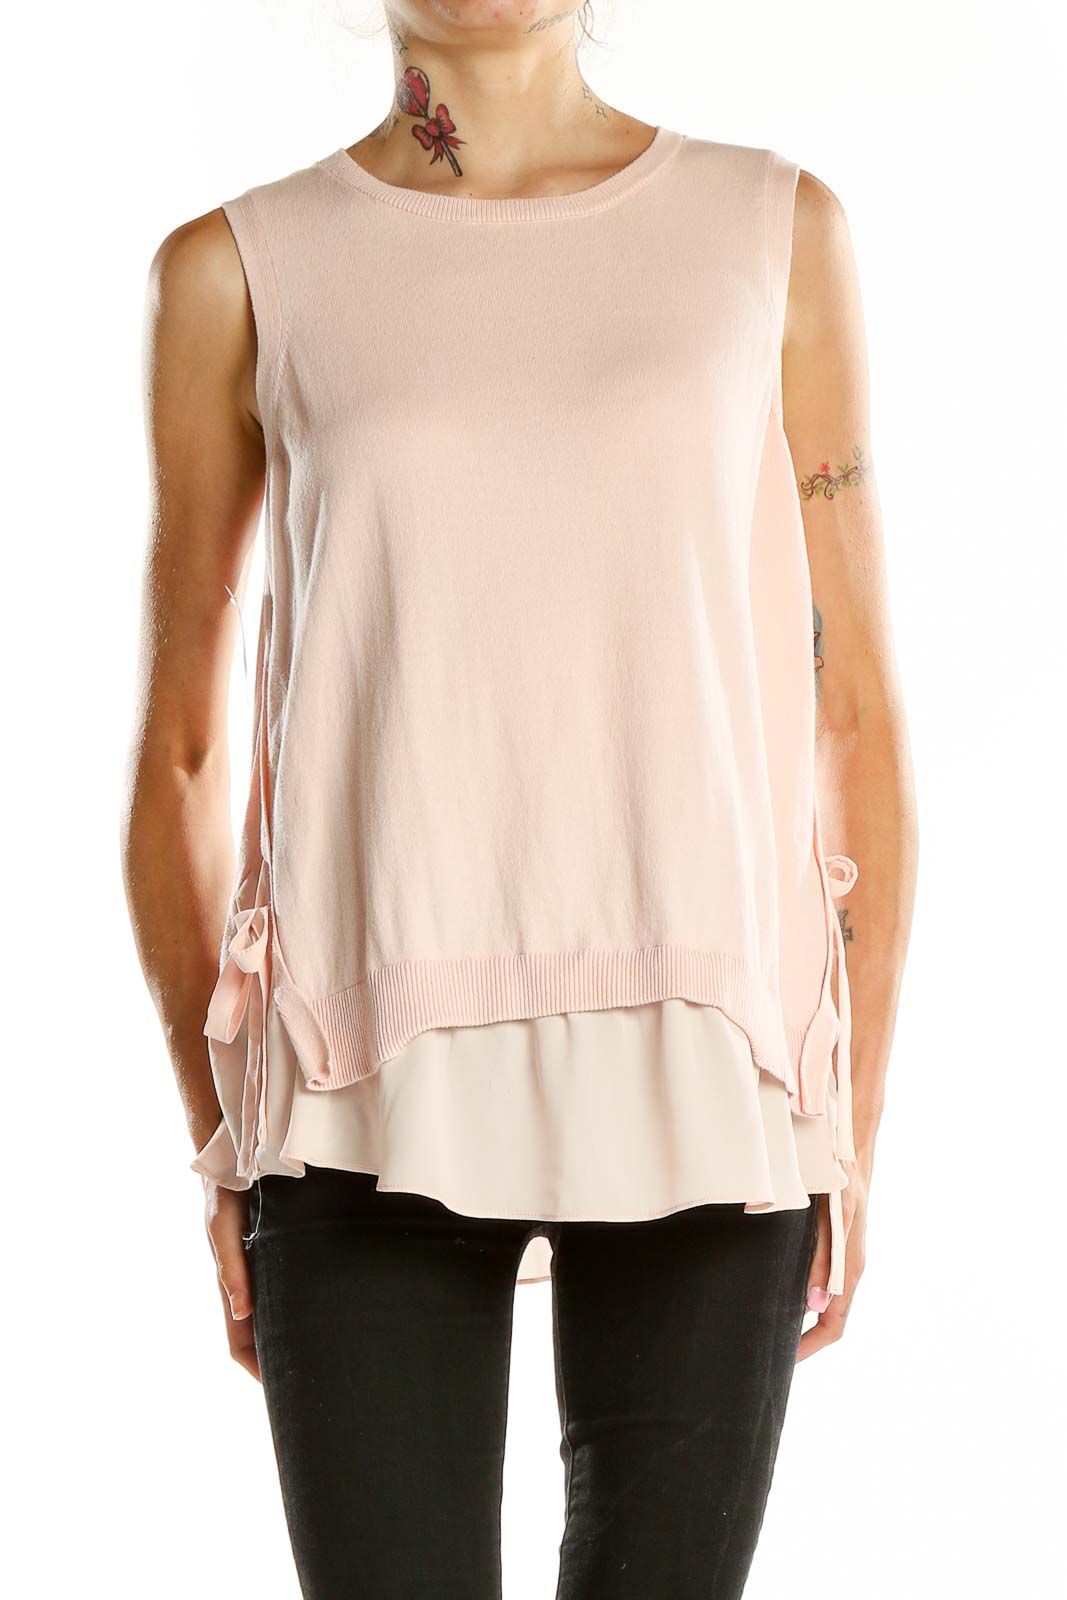 Pink Sleeveless Knit Layered Top Front